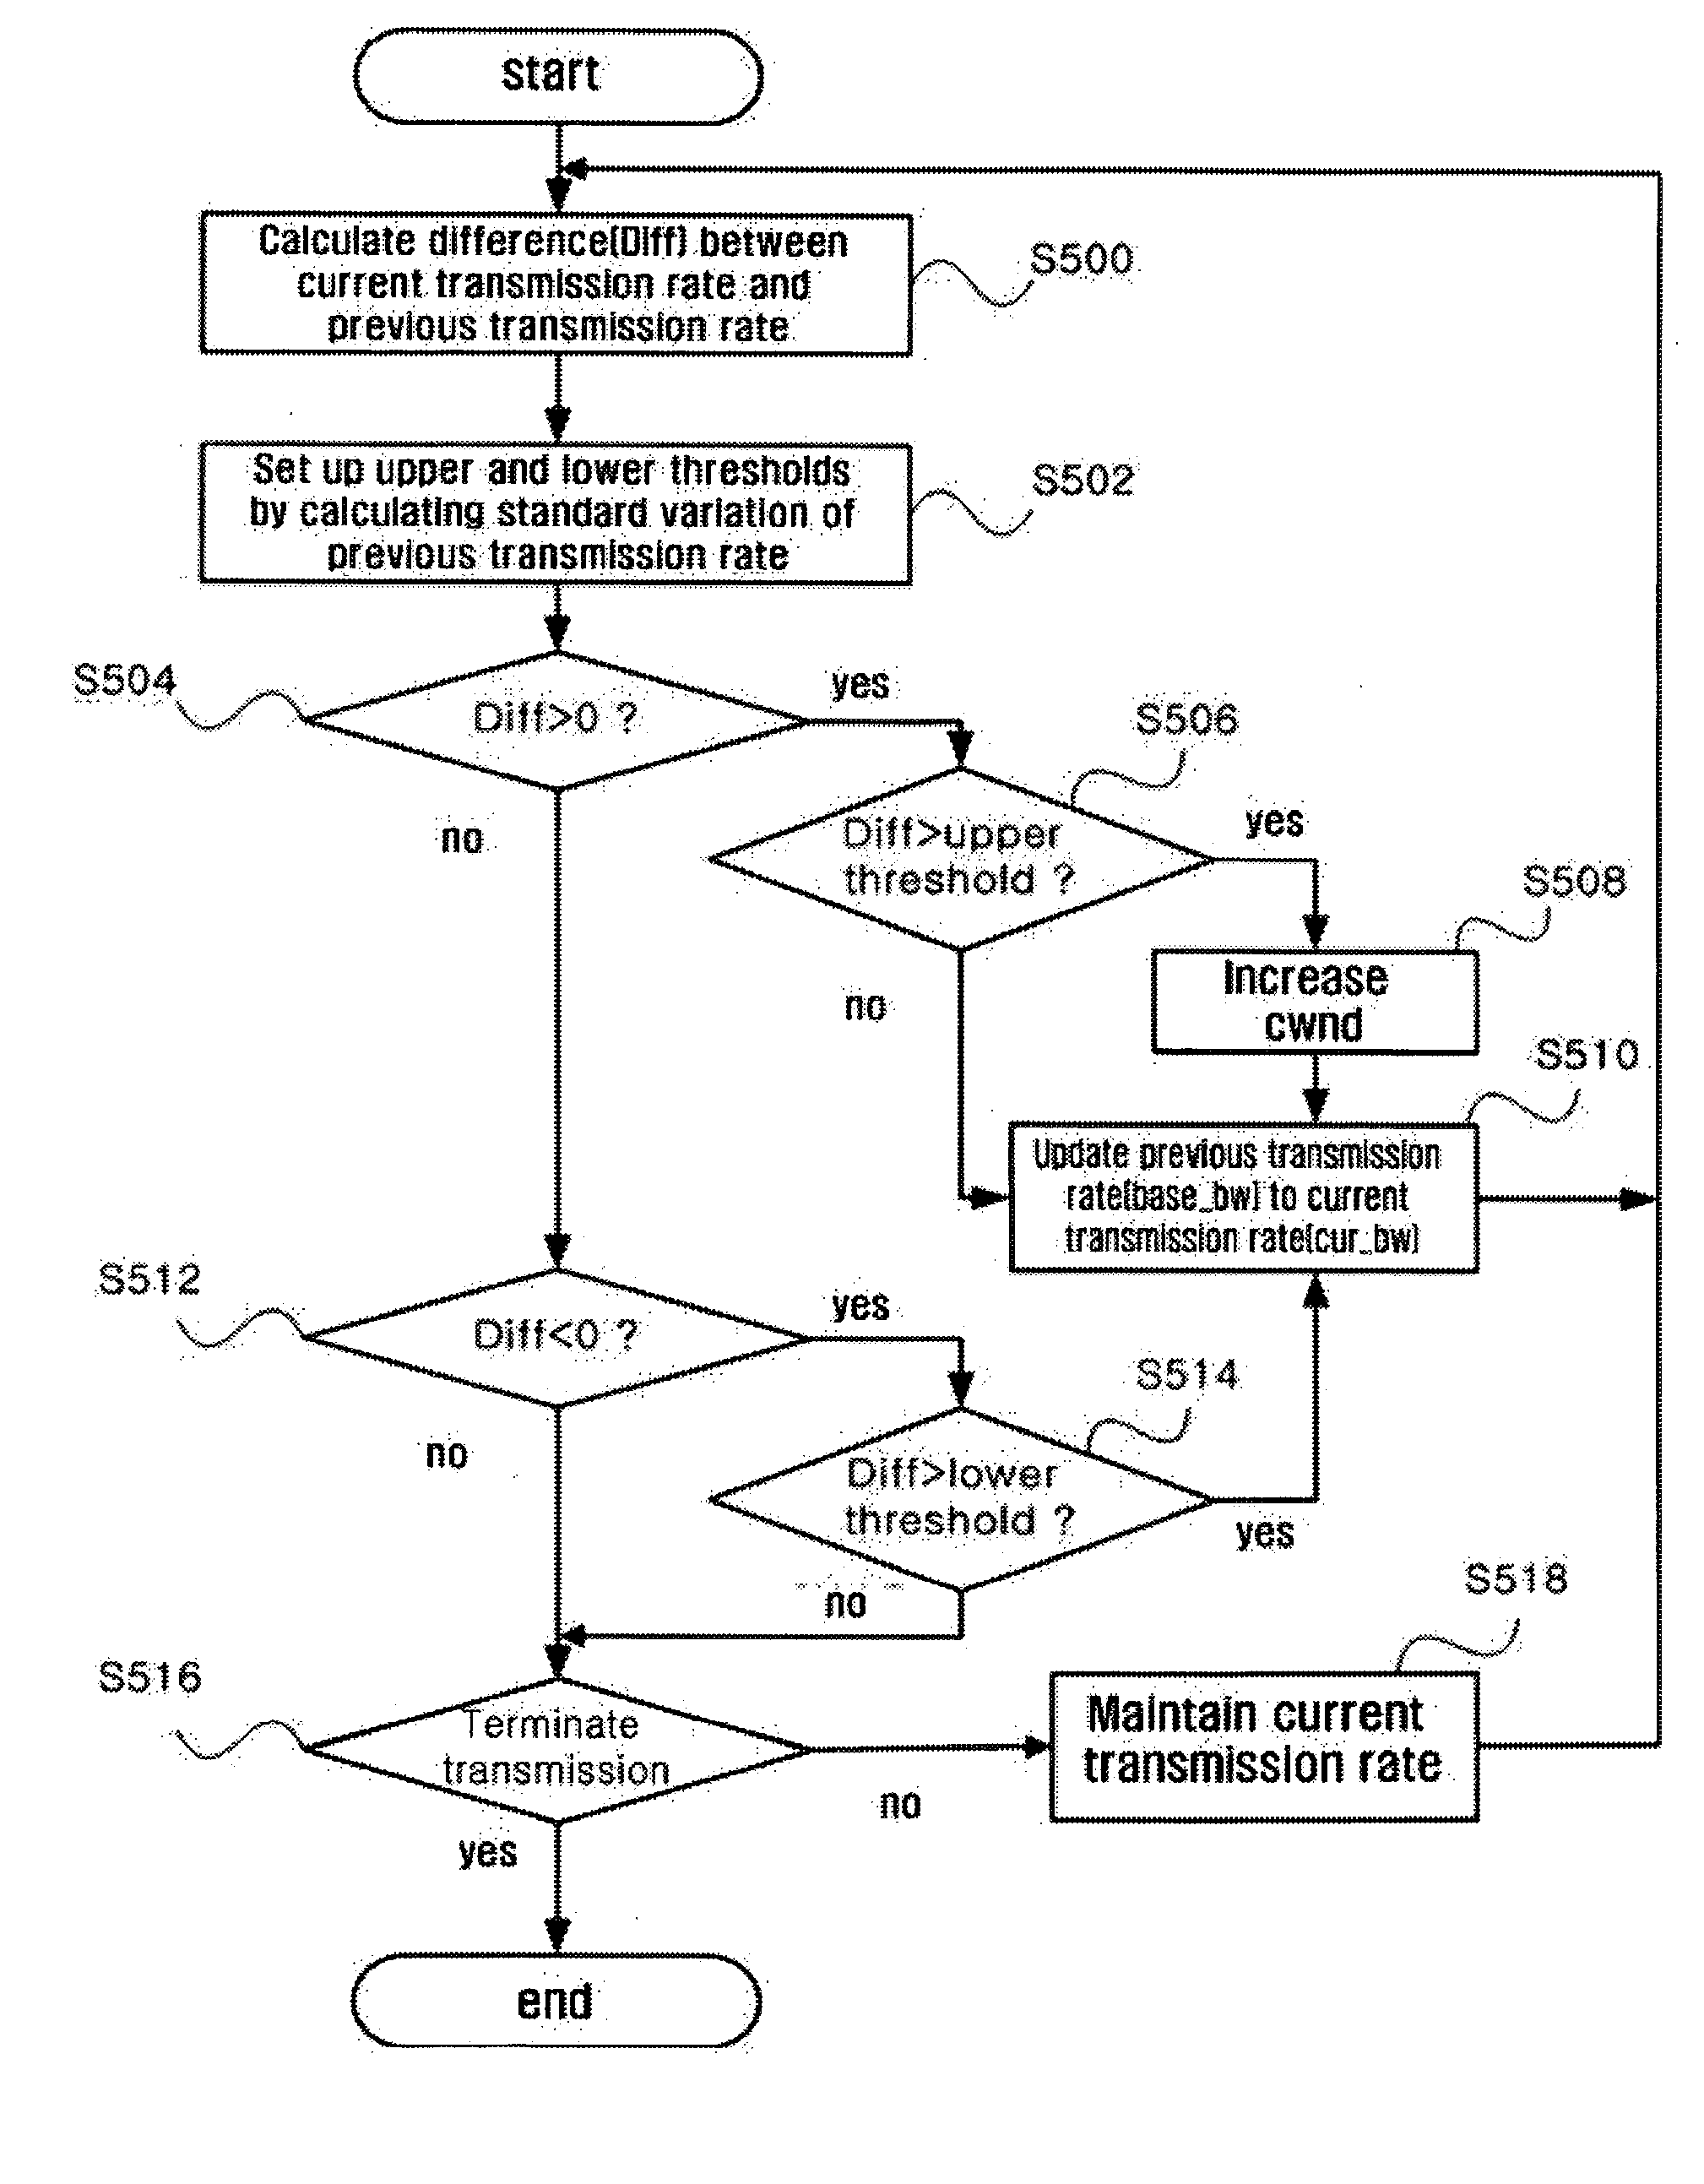 Method for adjusting a transmission rate to obtain the optimum transmission rate in a mobile ad hoc network environment